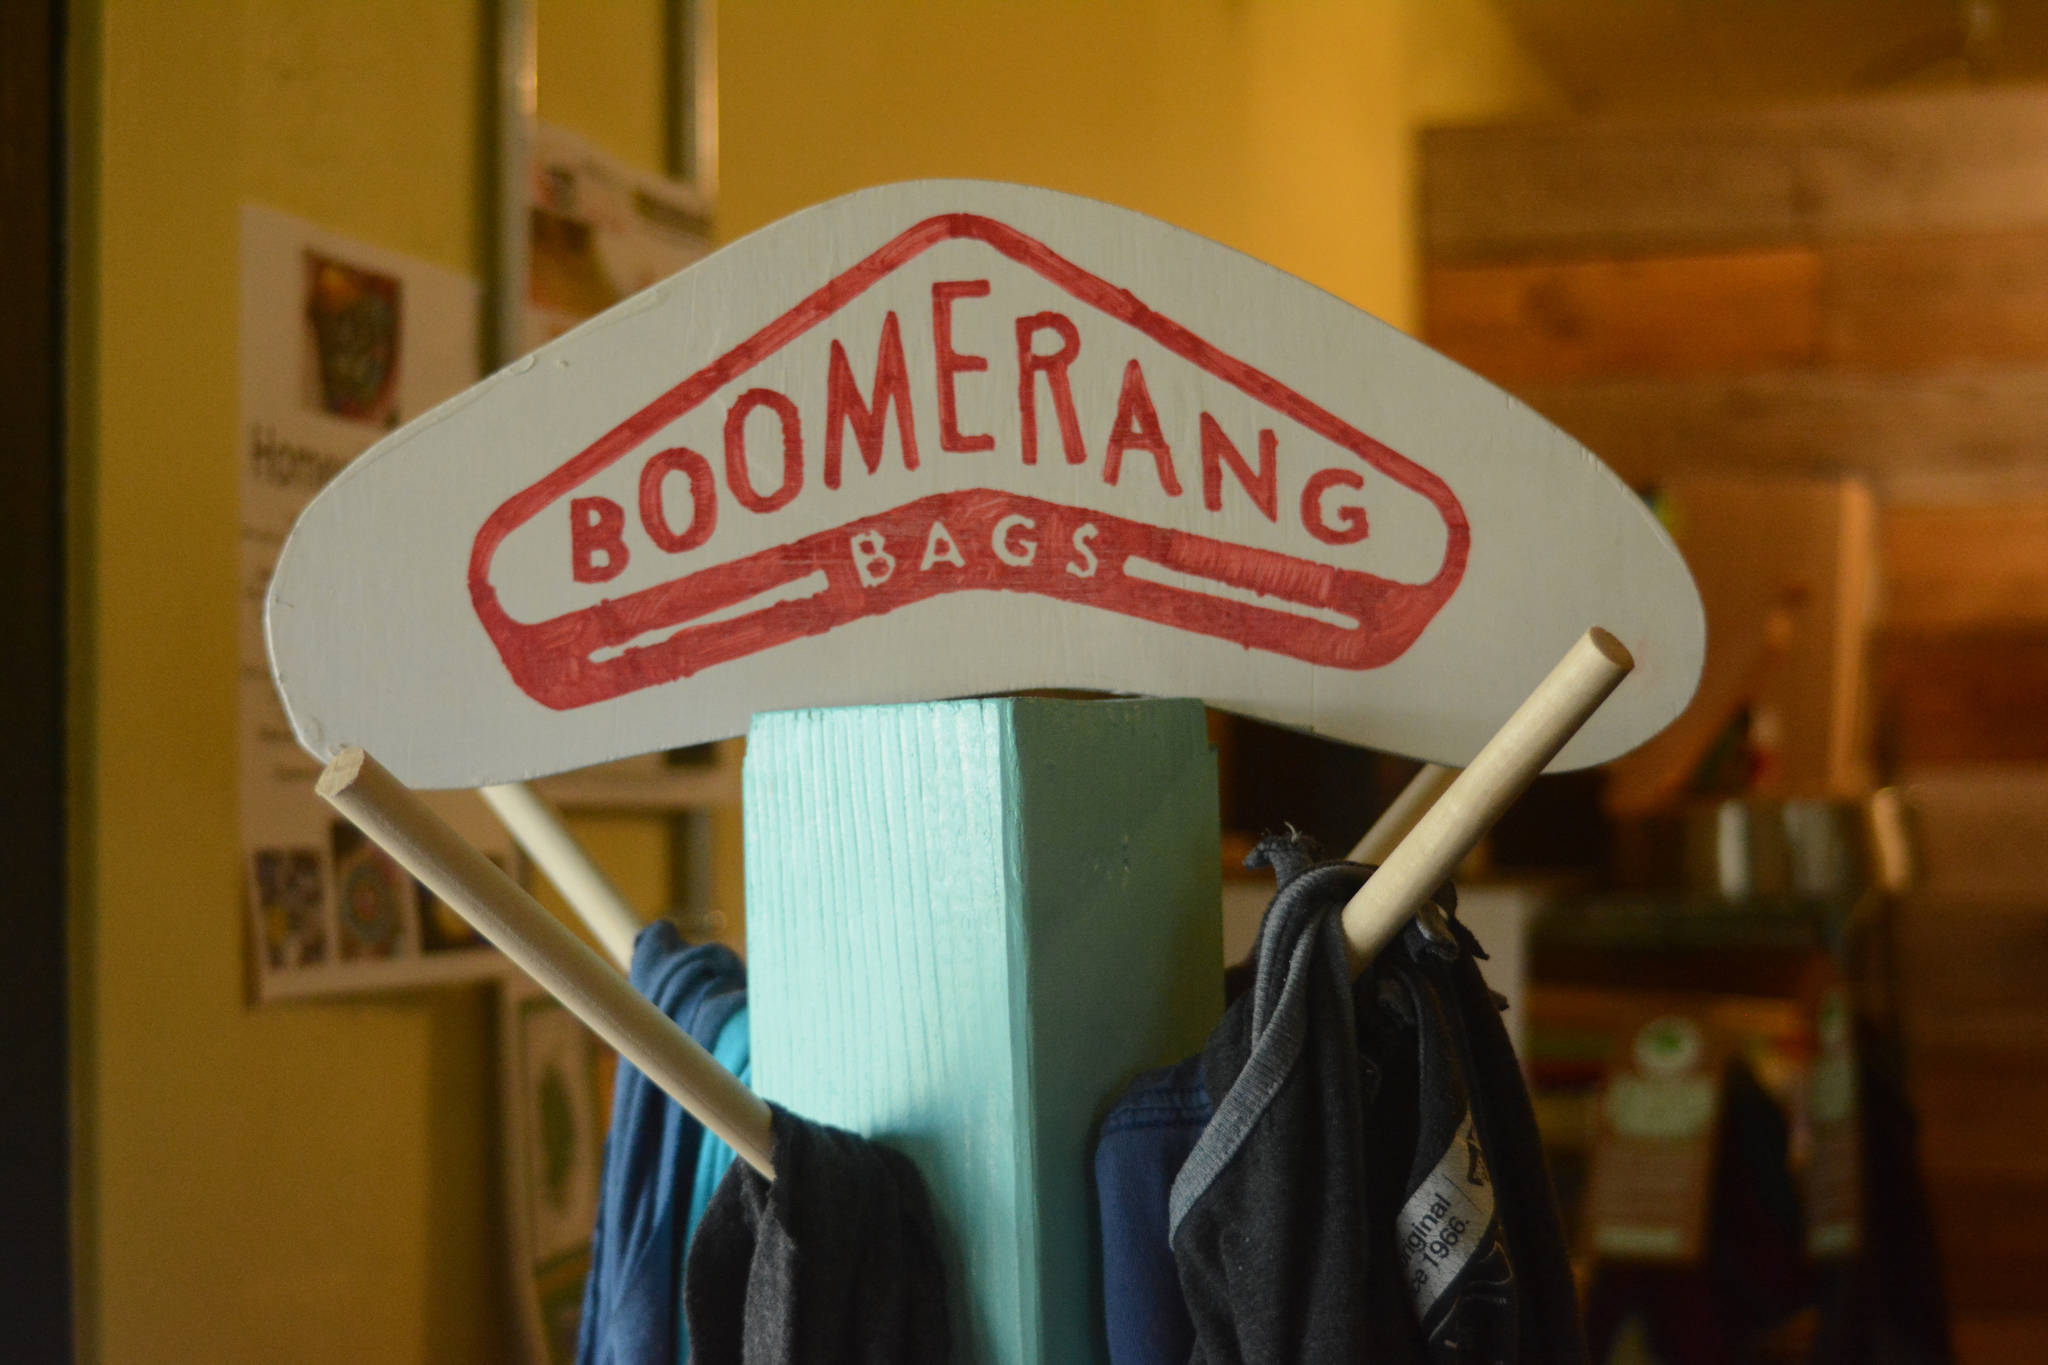 A display of Boomerang Bags is available at Sustainable Wares, shown here Tuesday, Sept. 25, 2018 on Ocean Drive in Homer, Alaska. Store owner Karen West said that people have been regularly using the bags. (Photo by Michael Armstrong/Homer News)